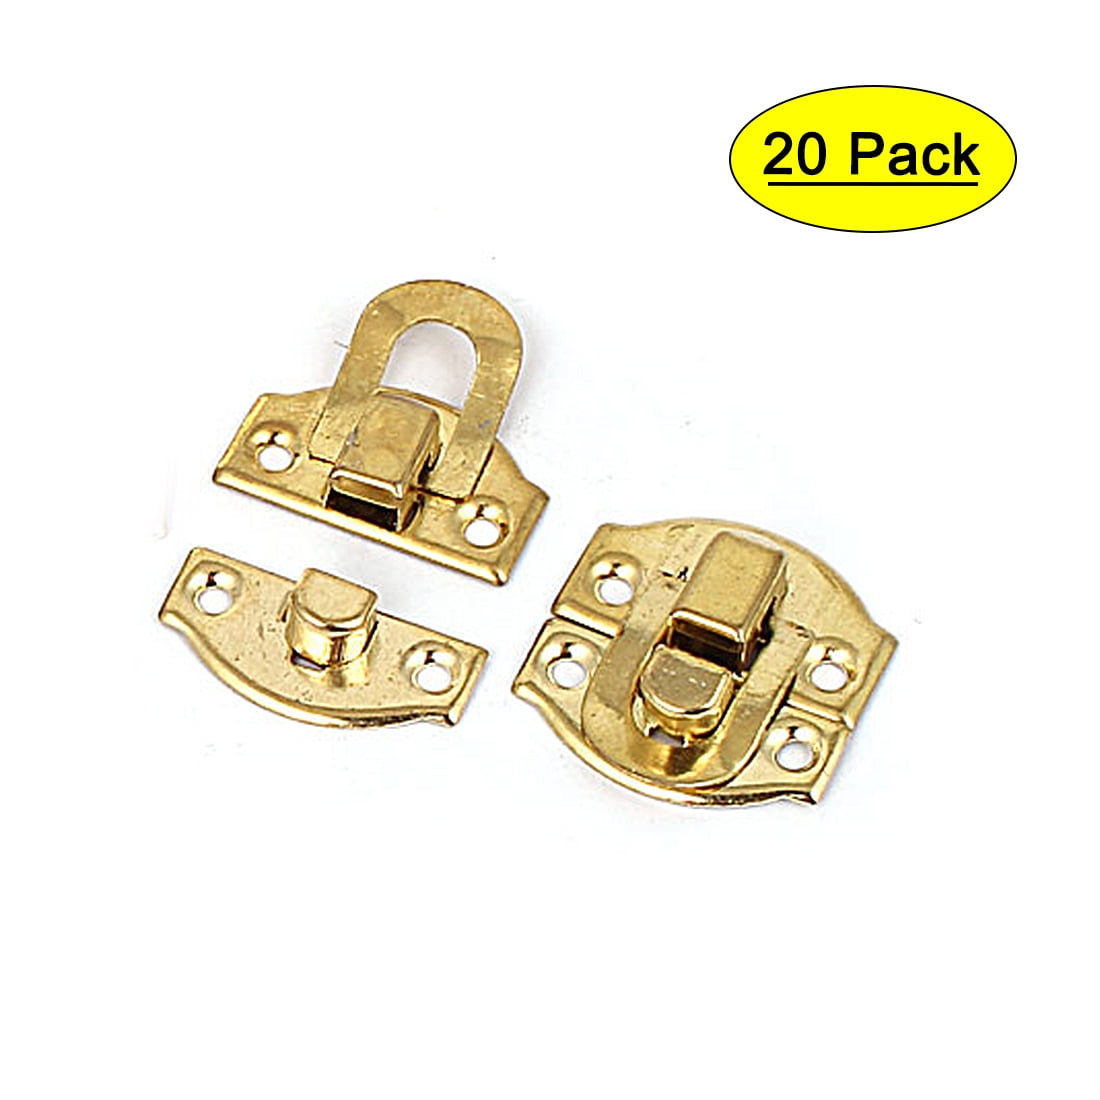 Color : Silver Stainless Steel Lock 2pcs Vintage Toolbox Locks Jewelry Chest Box Antique Metal Buckle Suitcase Case Toggle Lock Hasp Latch Thickened Solid 